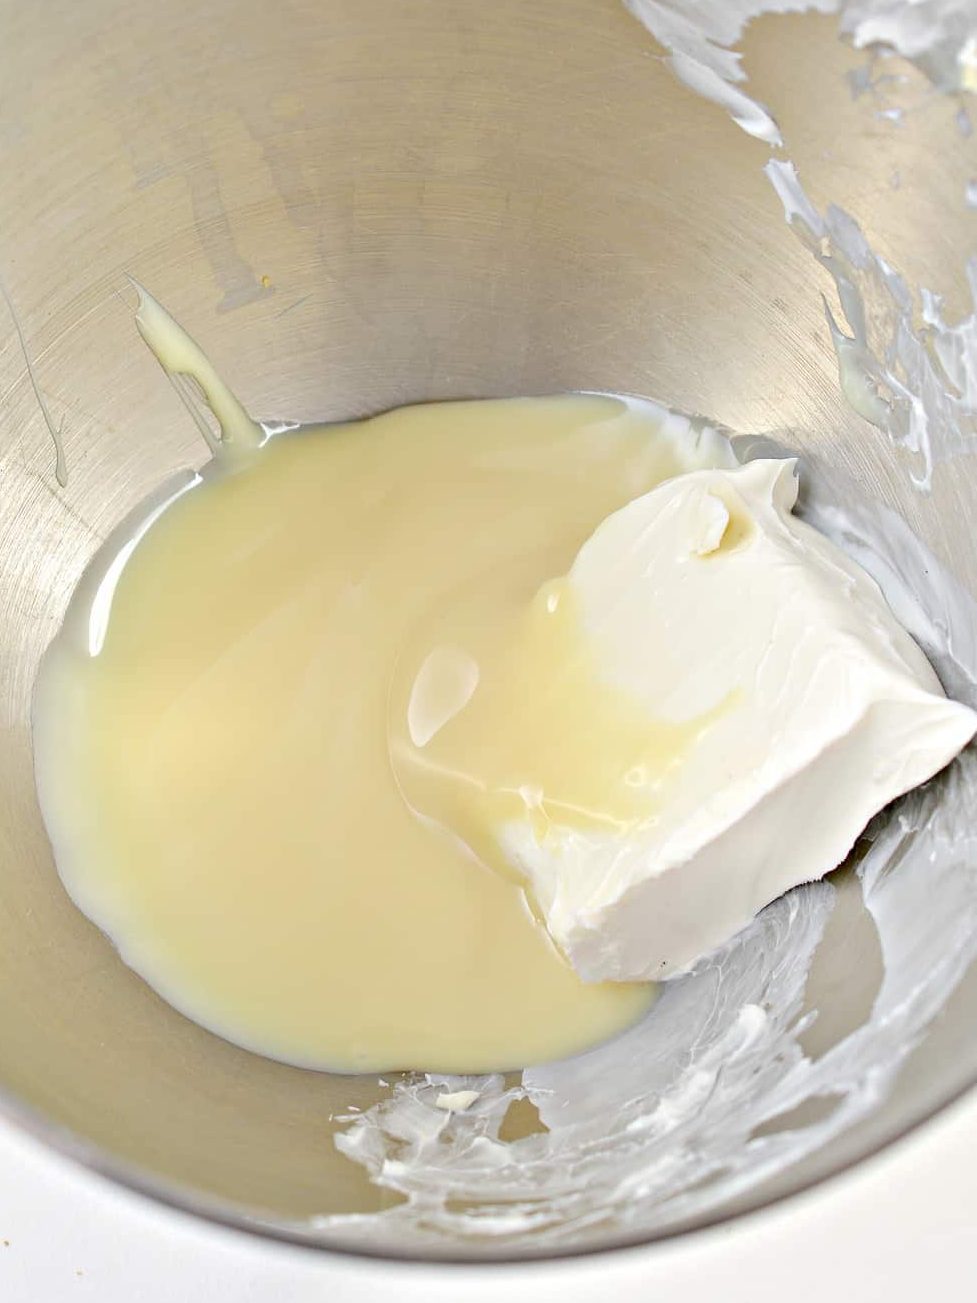 In a mixing bowl, beat together the cream cheese and sweetened condensed milk until smooth.